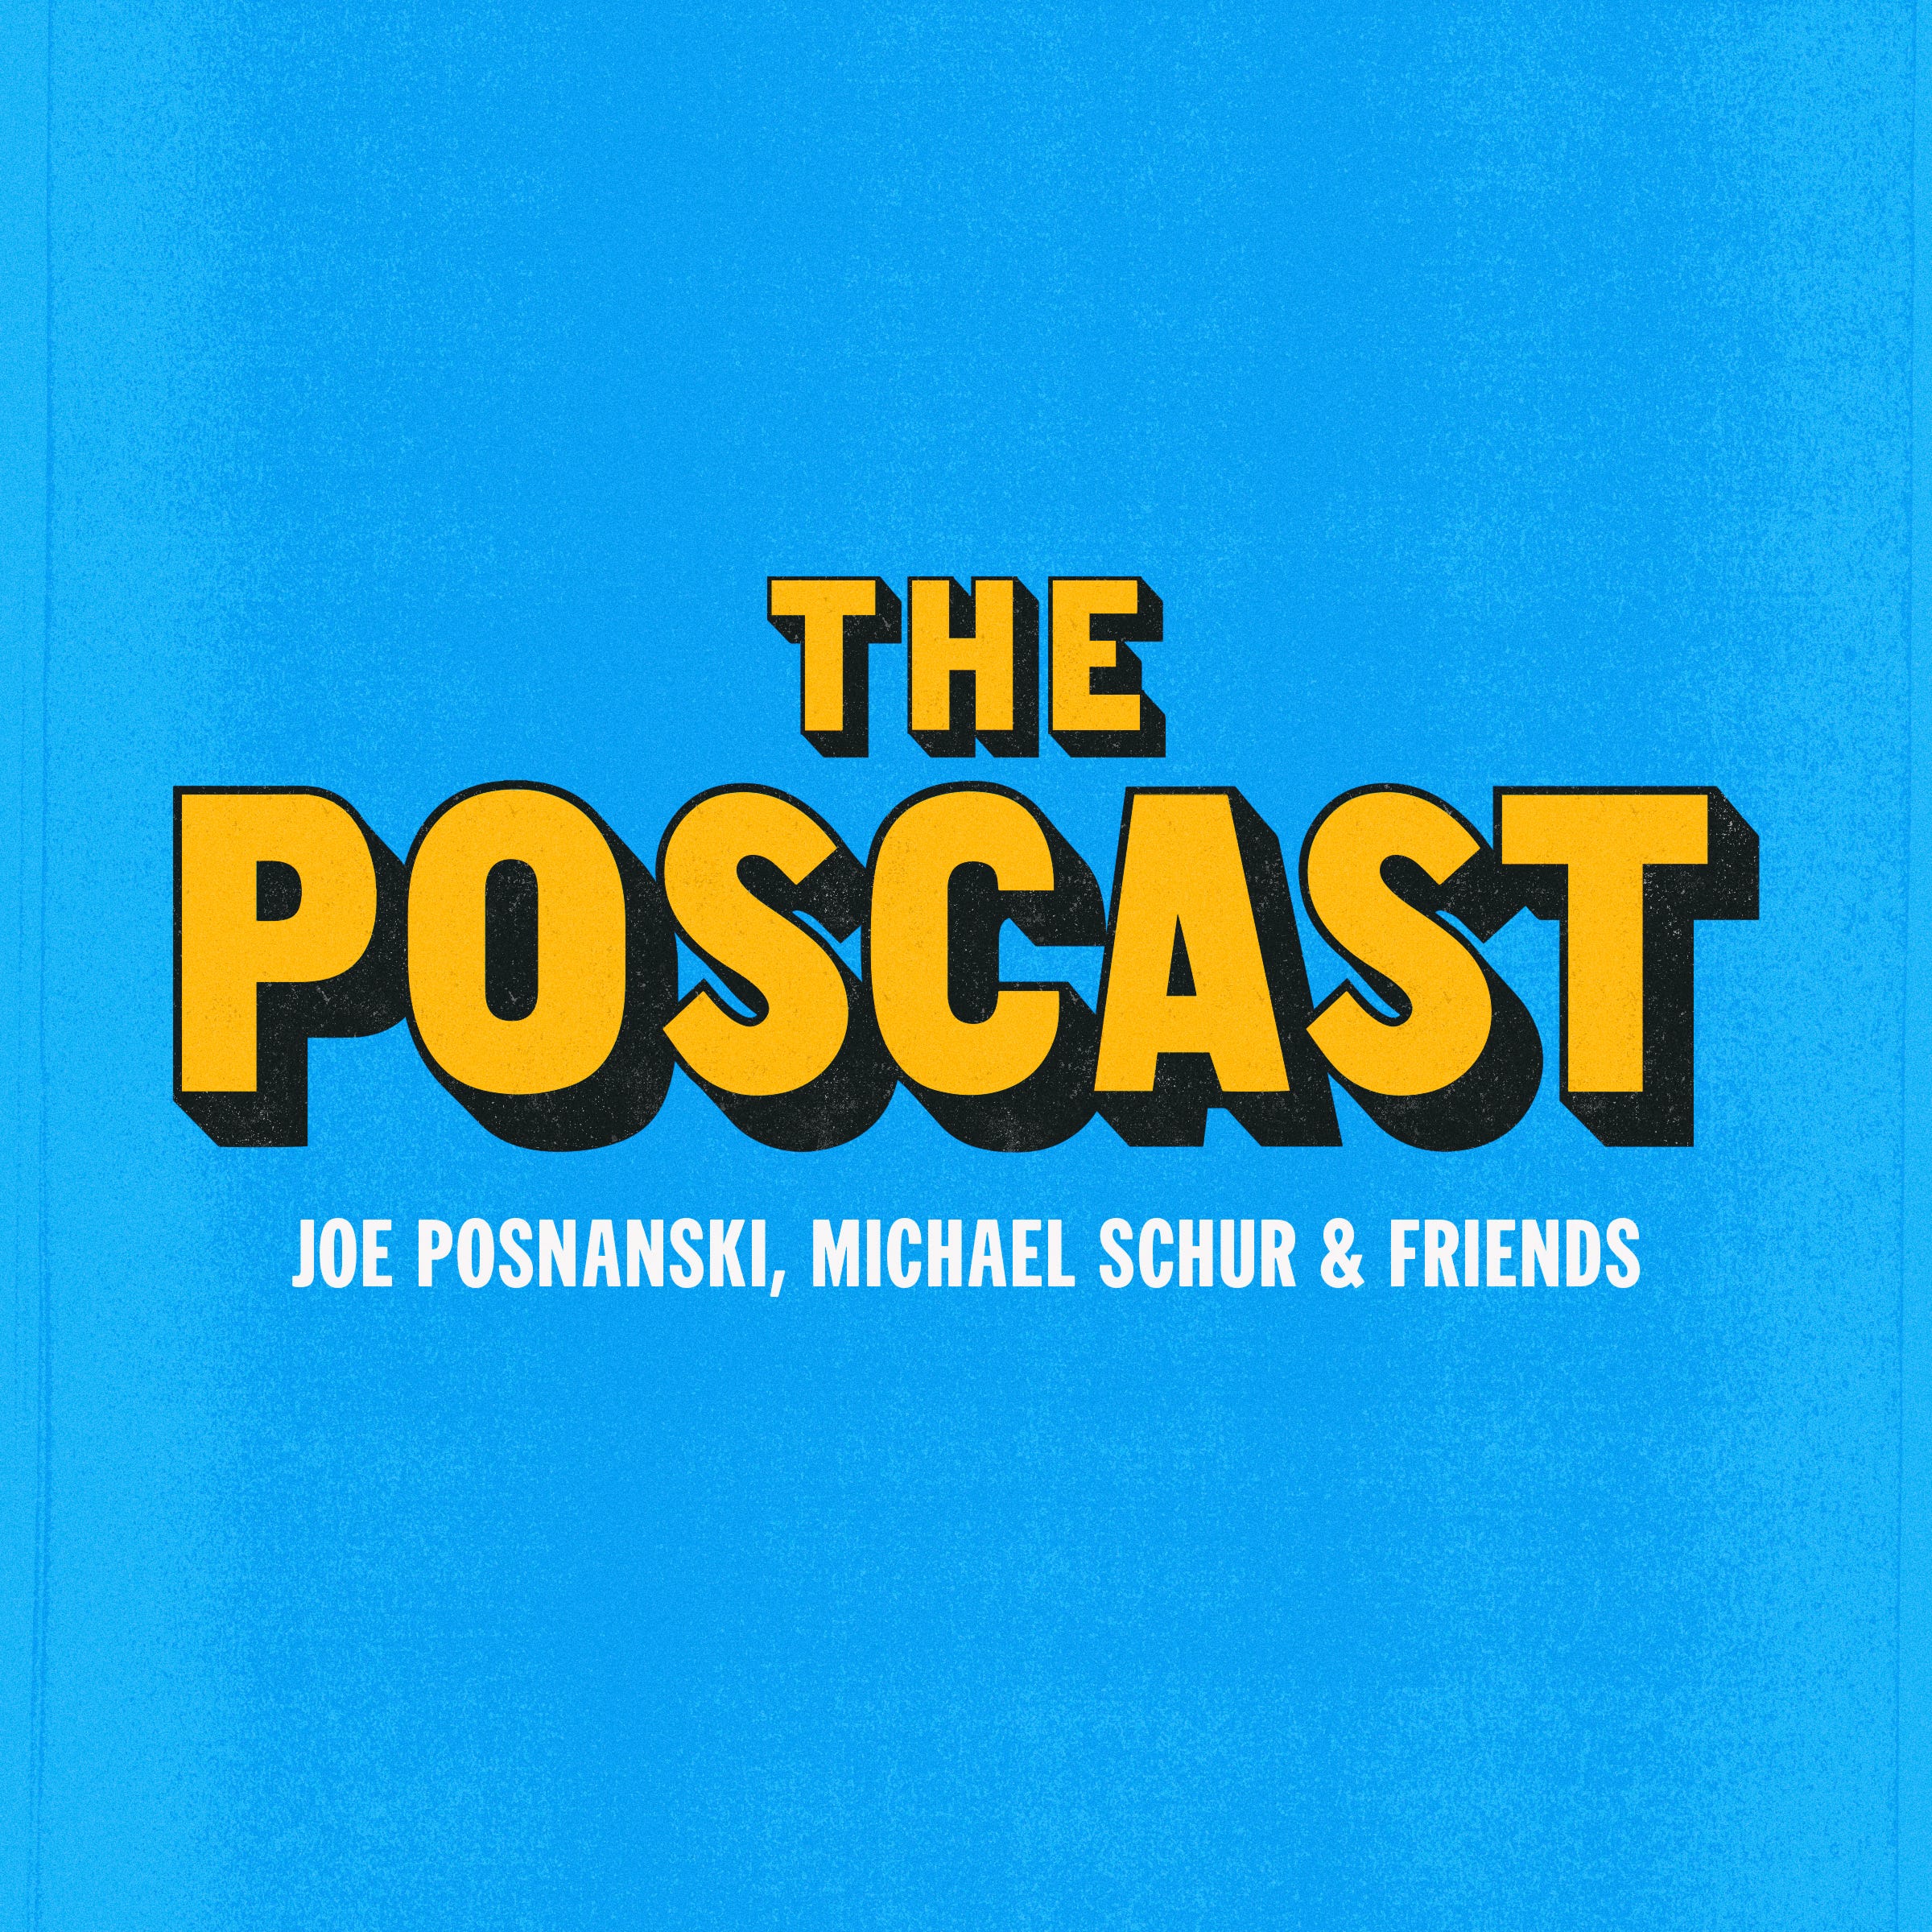 The new PosCast with Mike Schur!